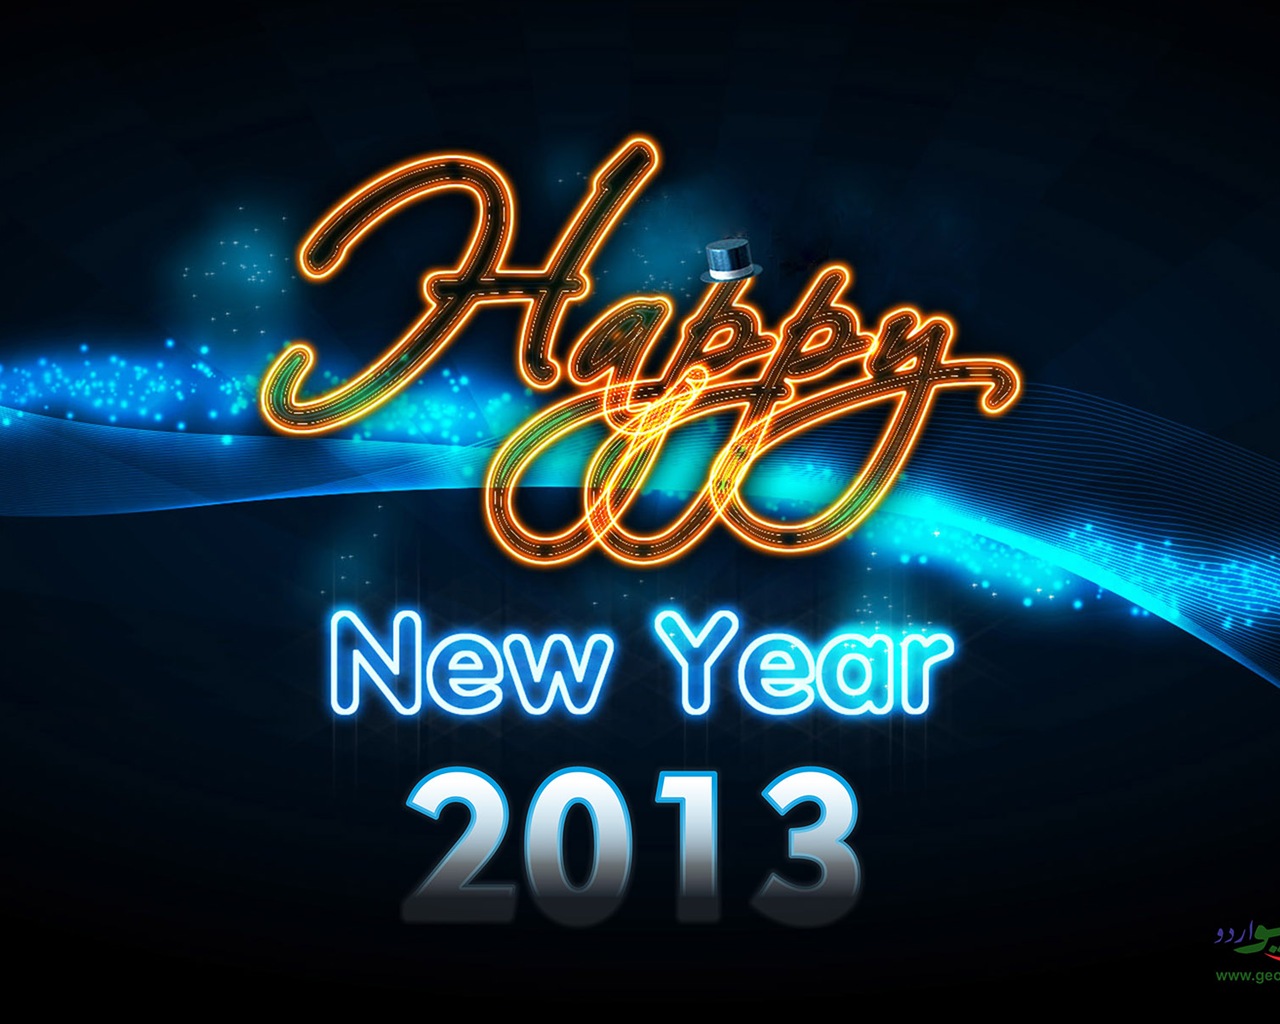 2013 Happy New Year HD wallpapers #17 - 1280x1024